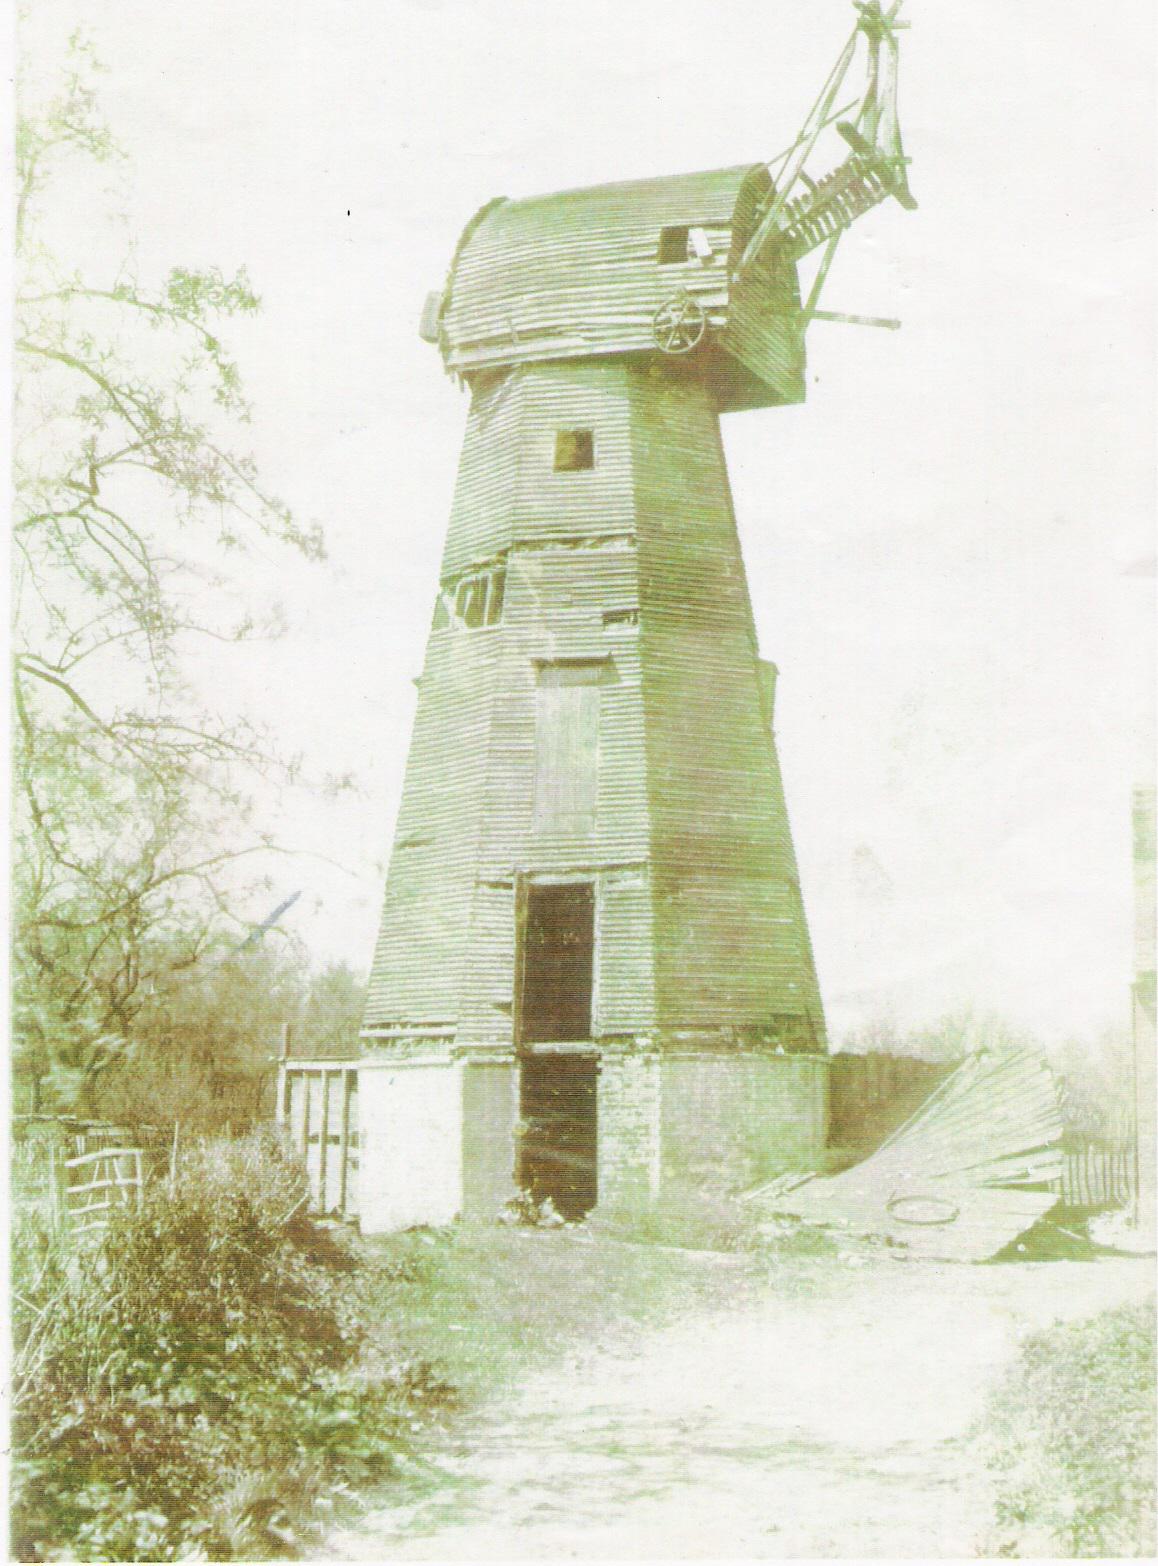 Undated - Mill at site of Mill House, Dunn Street